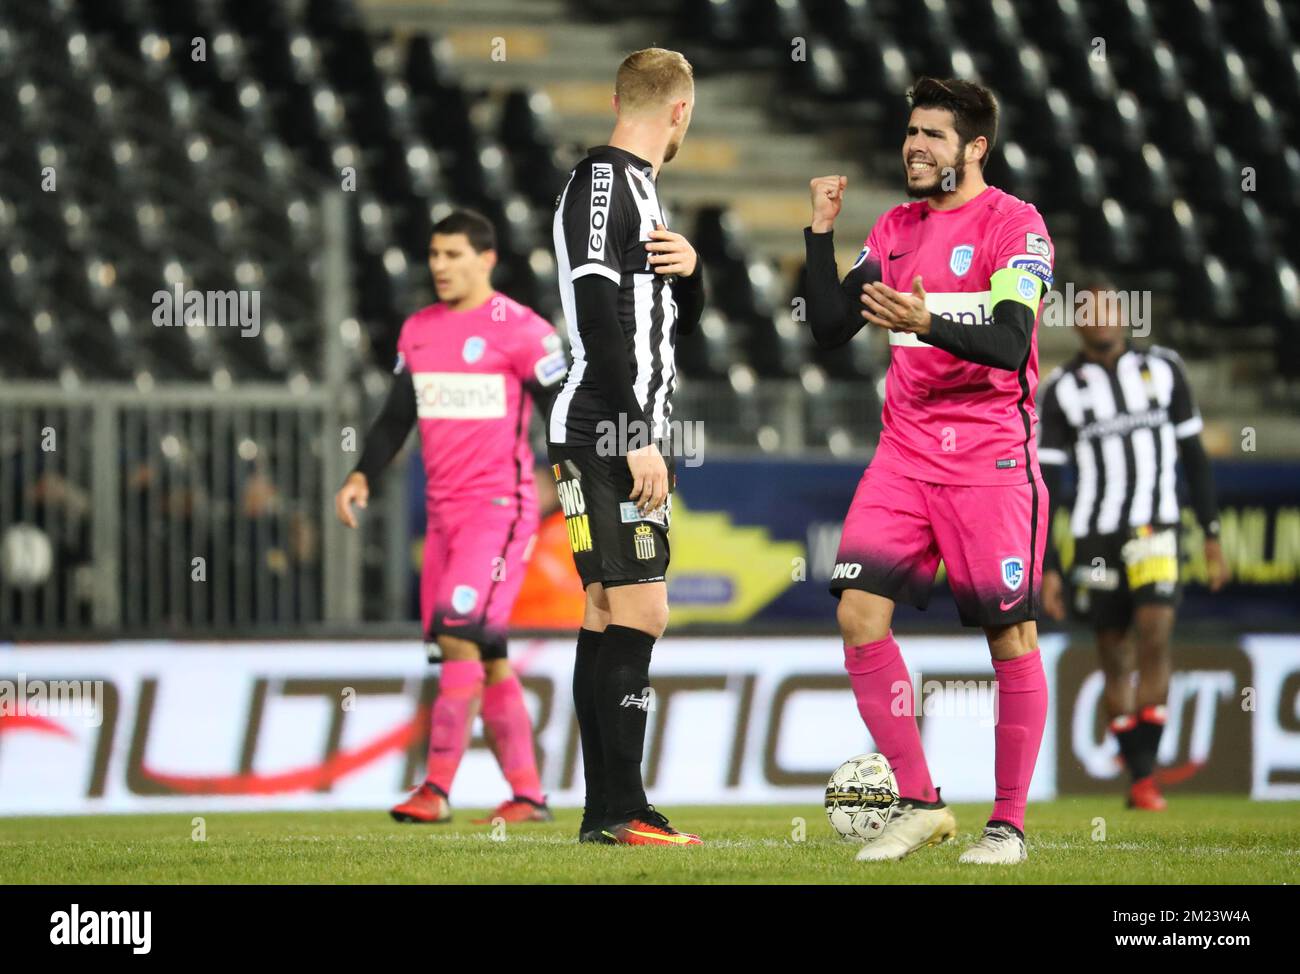 Charleroi's David Pollet looks dejected during a soccer game between Sporting Charleroi and KRC Genk, the quarter-final of the Croky Cup competition, Wednesday 14 December 2016 in Charleroi. BELGA PHOTO VIRGINIE